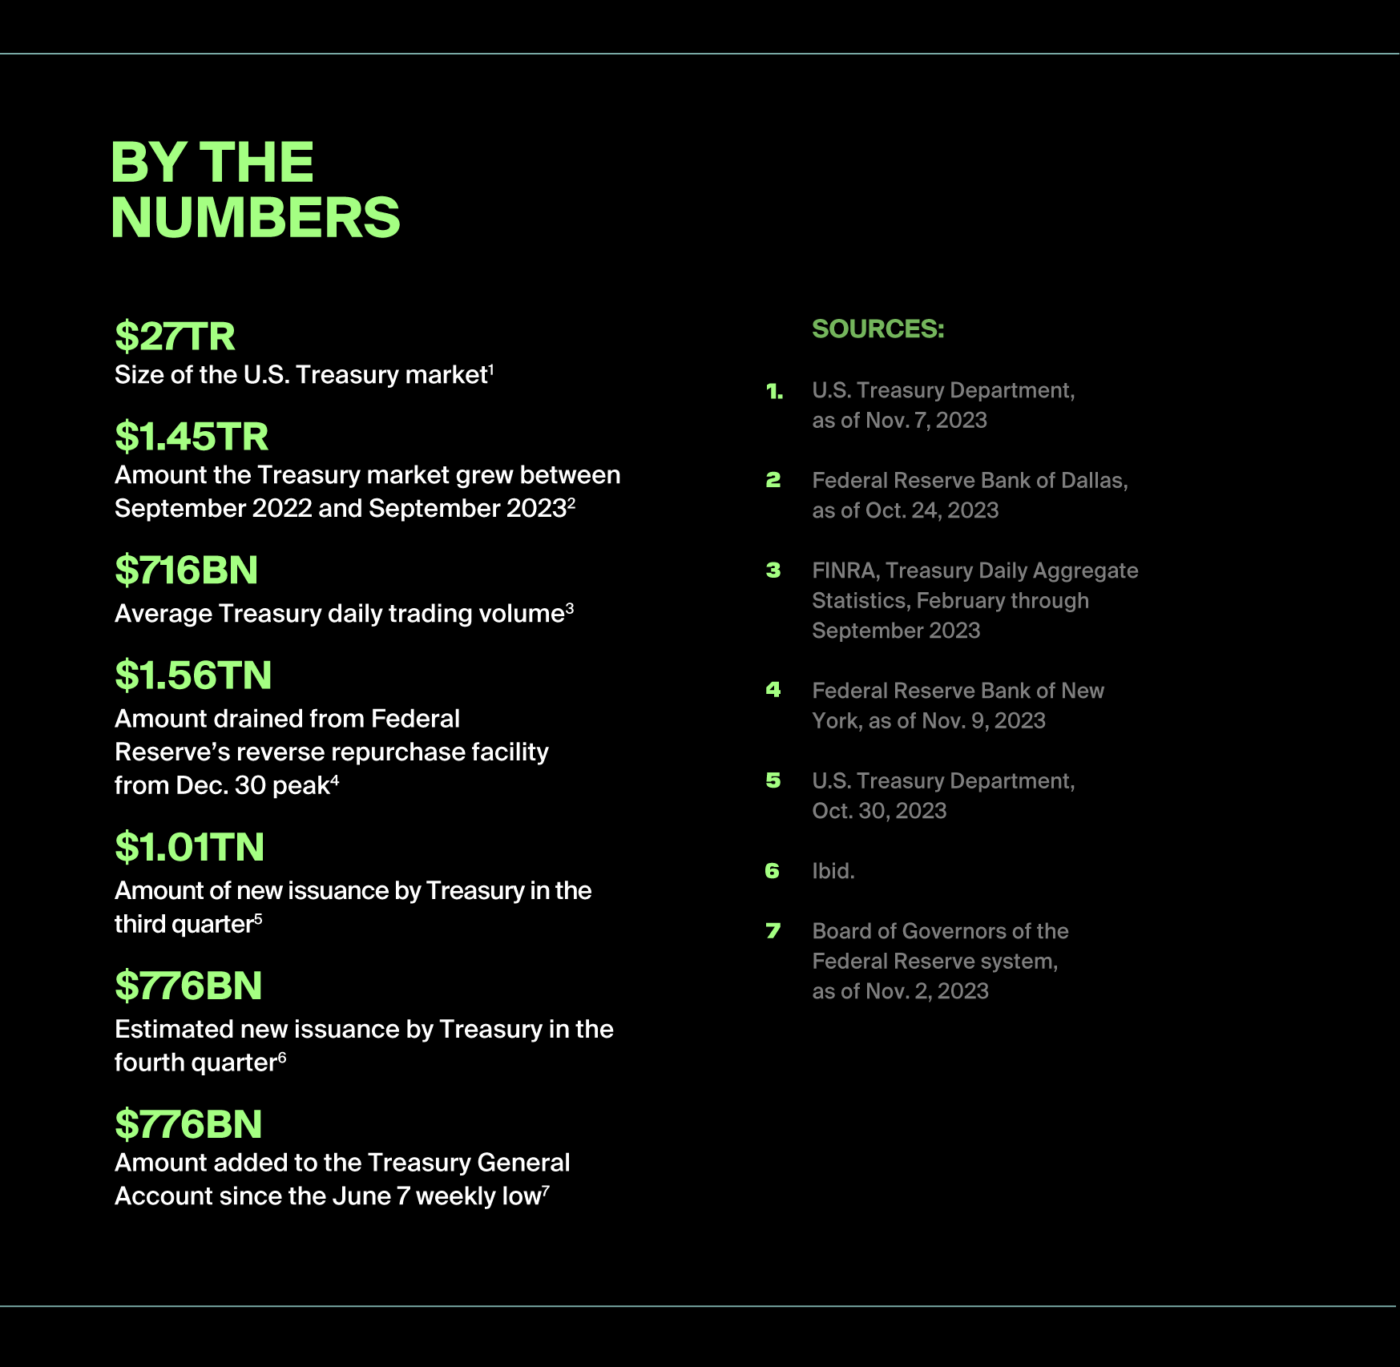 By the numbers chart